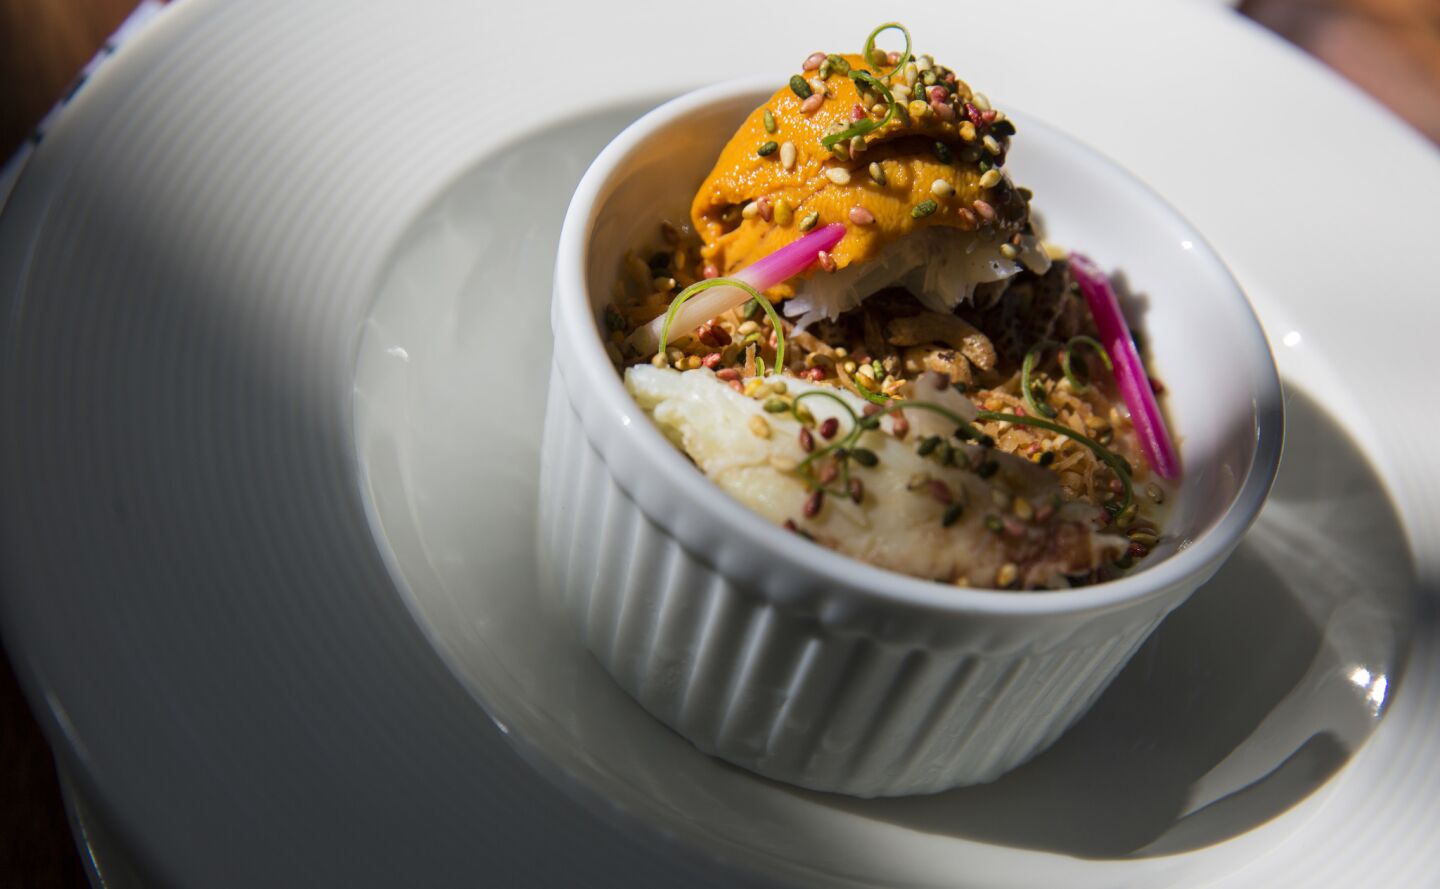 Dungeness crab chawan mushi with uni, ginger sprout and Japanese sesame at Michael's in Santa Monica.